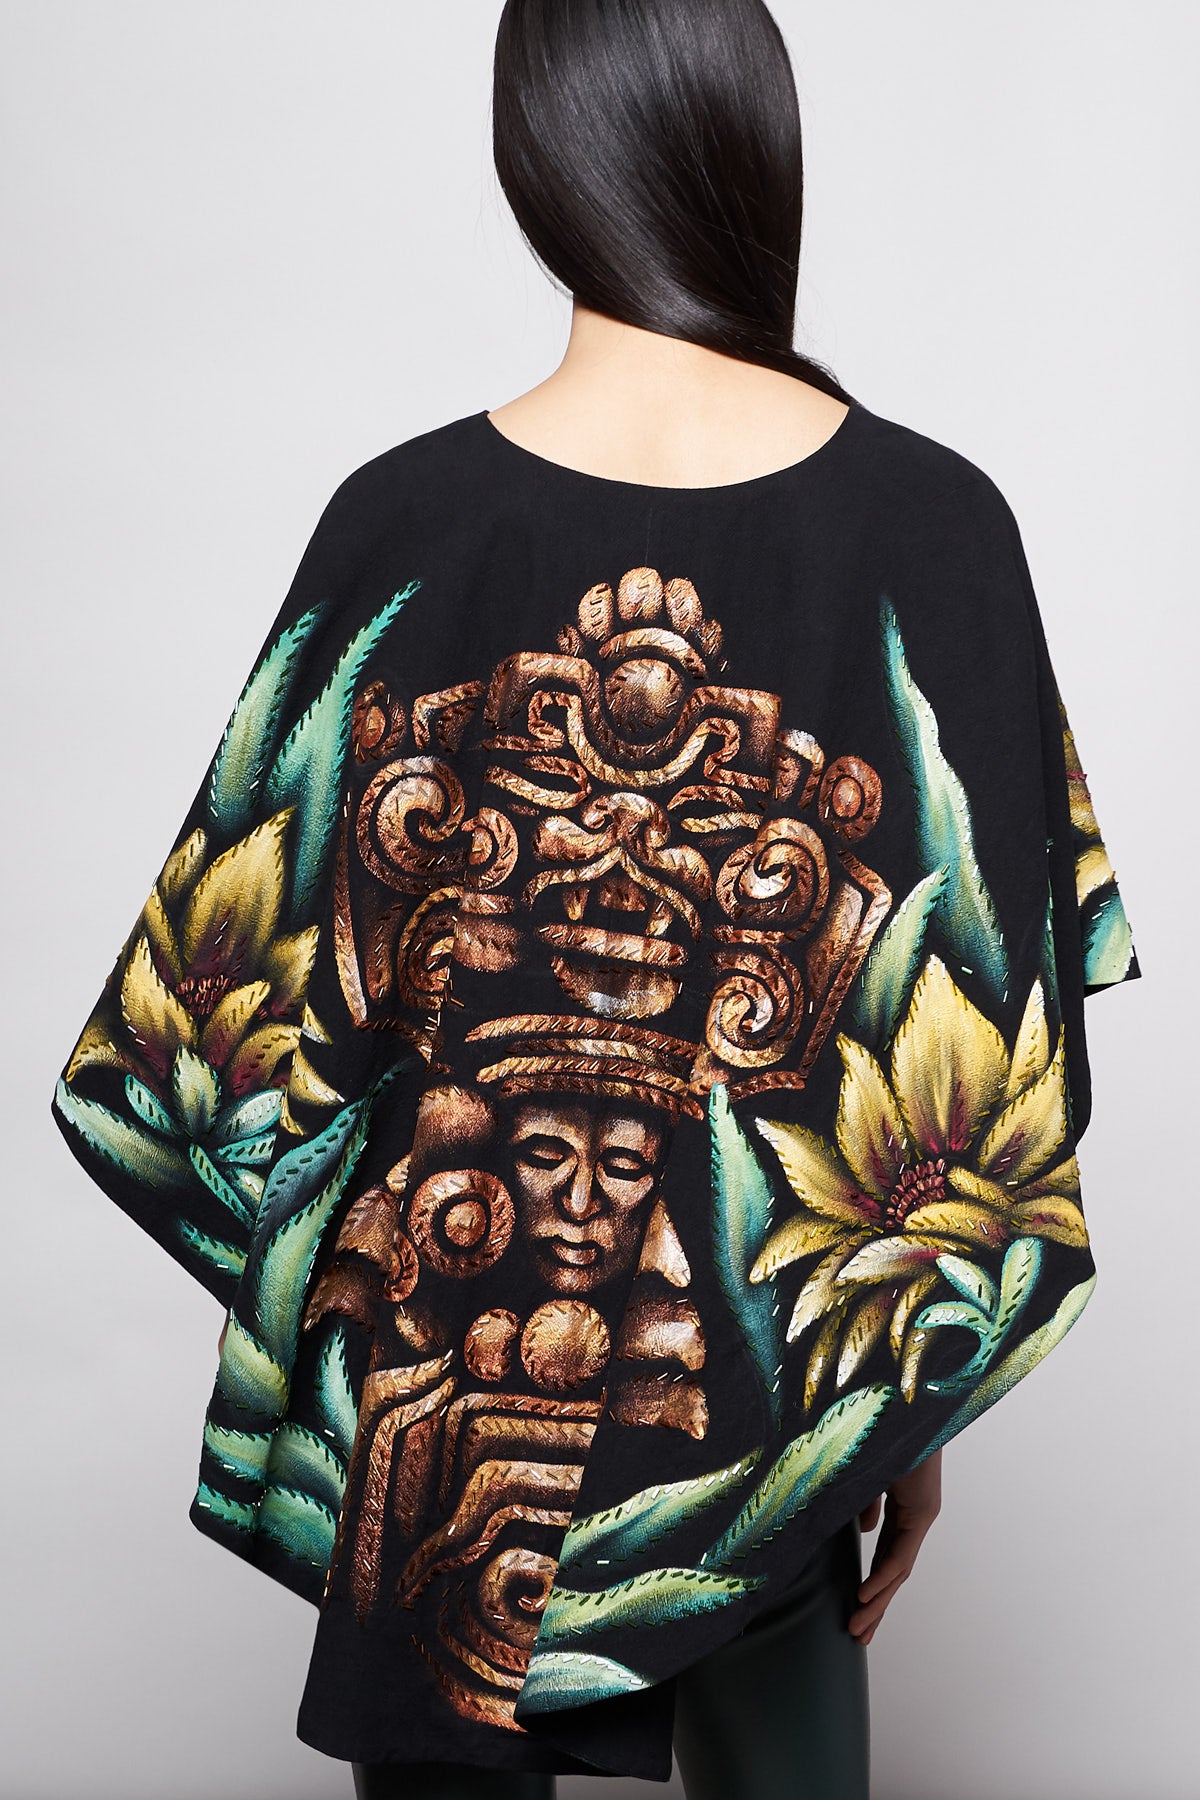 HIGH-LOW SHORT CAPE HAND-PAINTED AND HAND-EMBROIDERED - PREHISPANICO